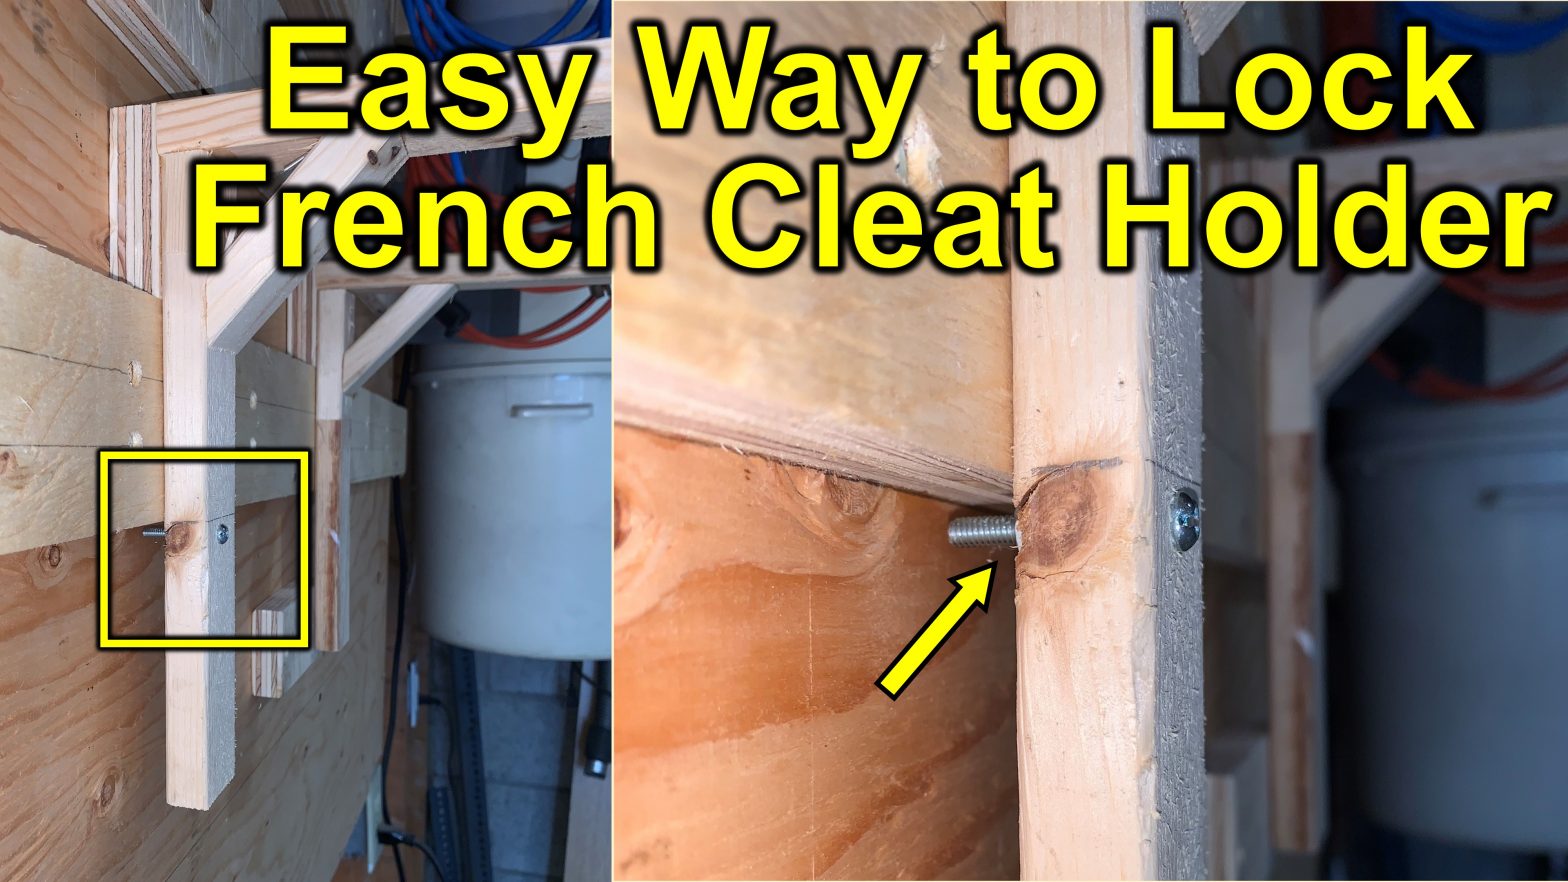 Keep French Cleat Tool/Shelf Holders From Falling Off; Easy Lock